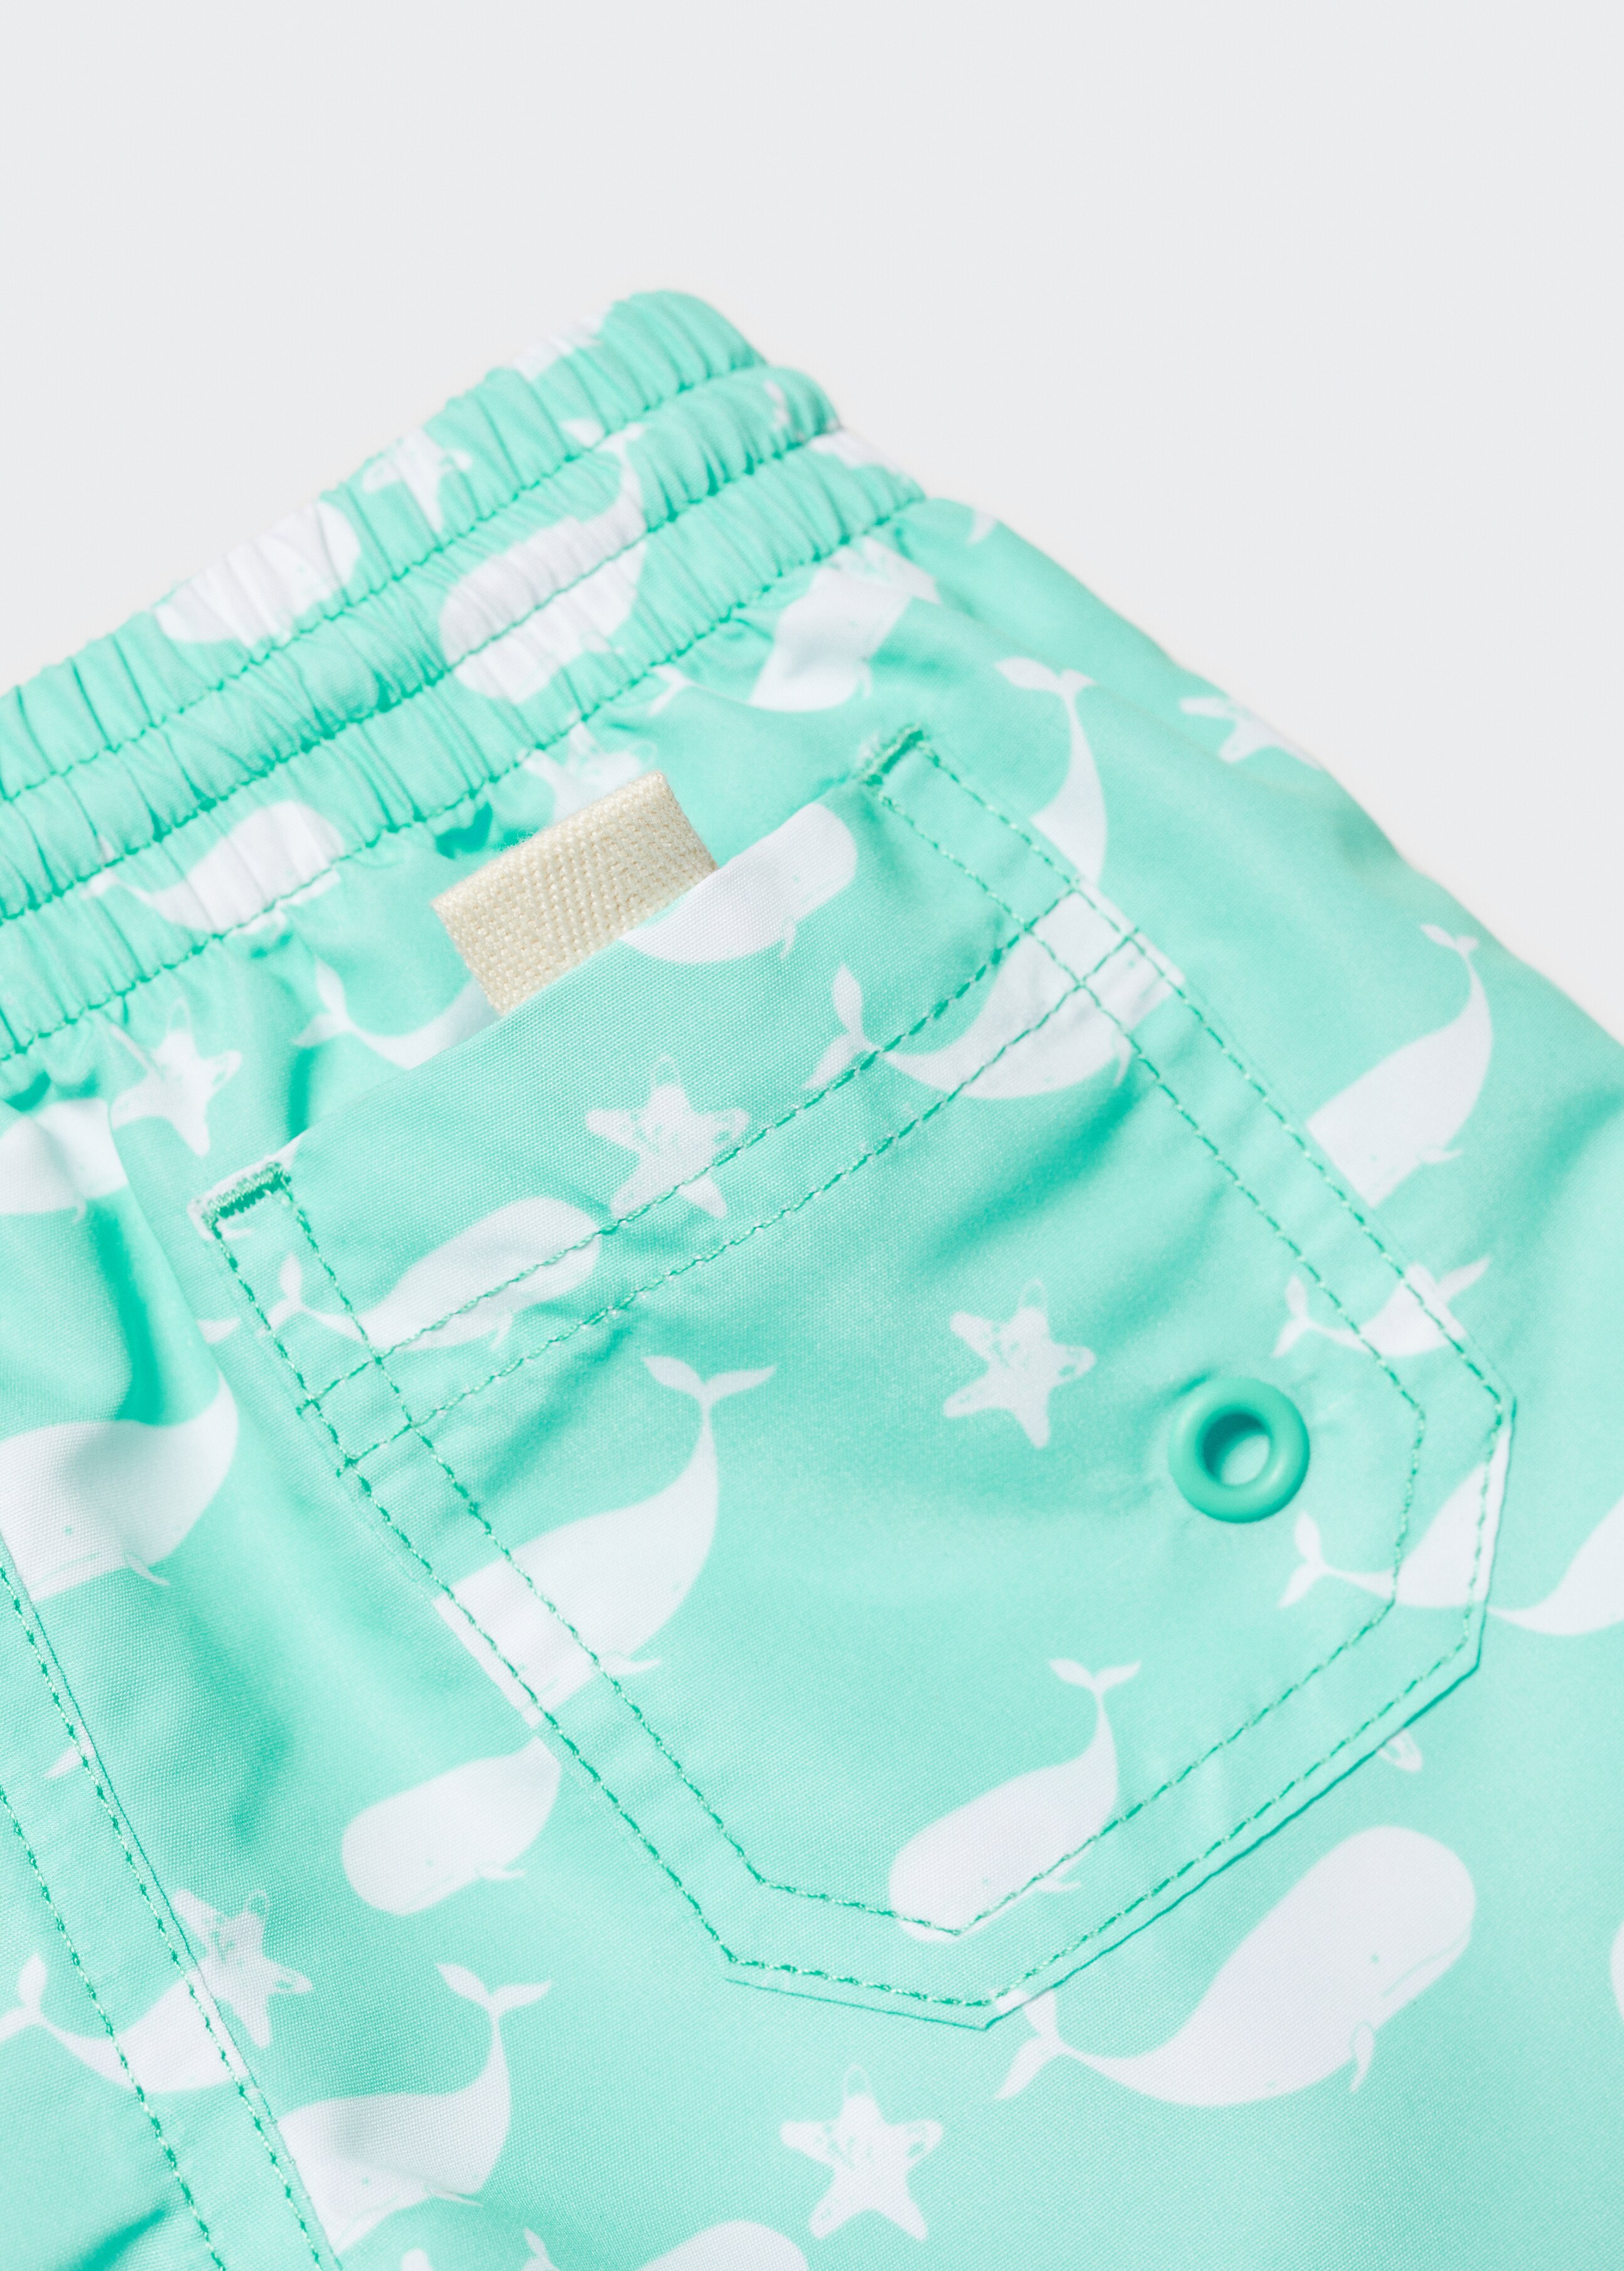 Printed swimming trunks - Details of the article 0